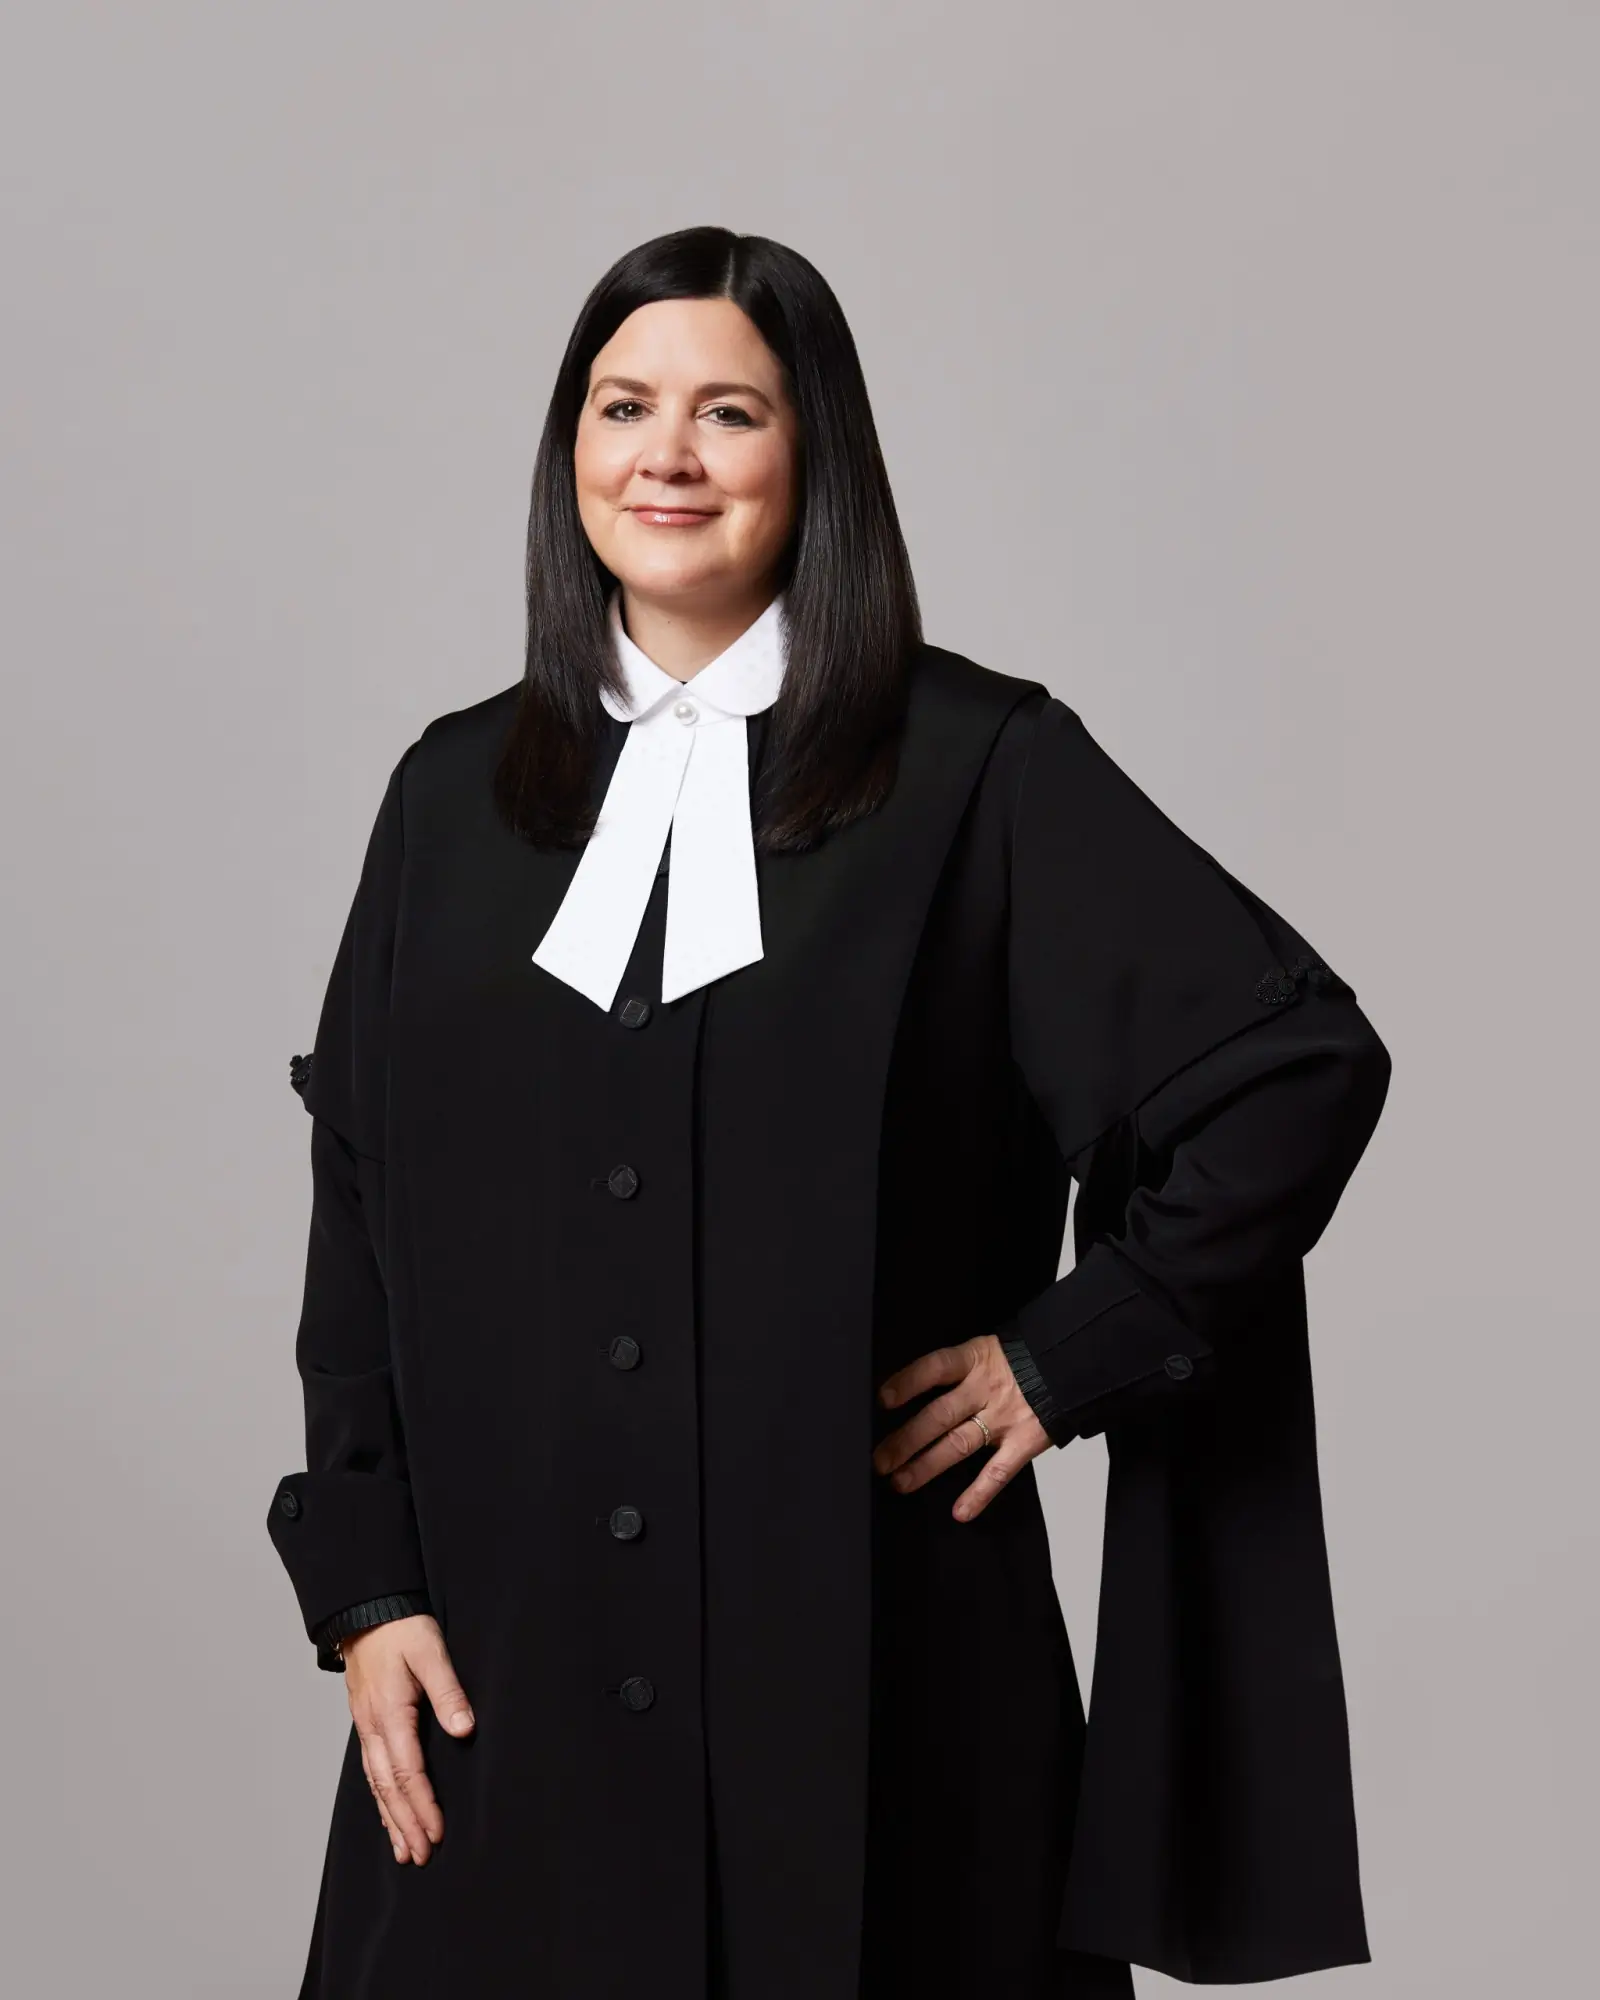 Michelle O'Bonsawin — Canada's first Indigenous Supreme Court Justice. The Honest Talk